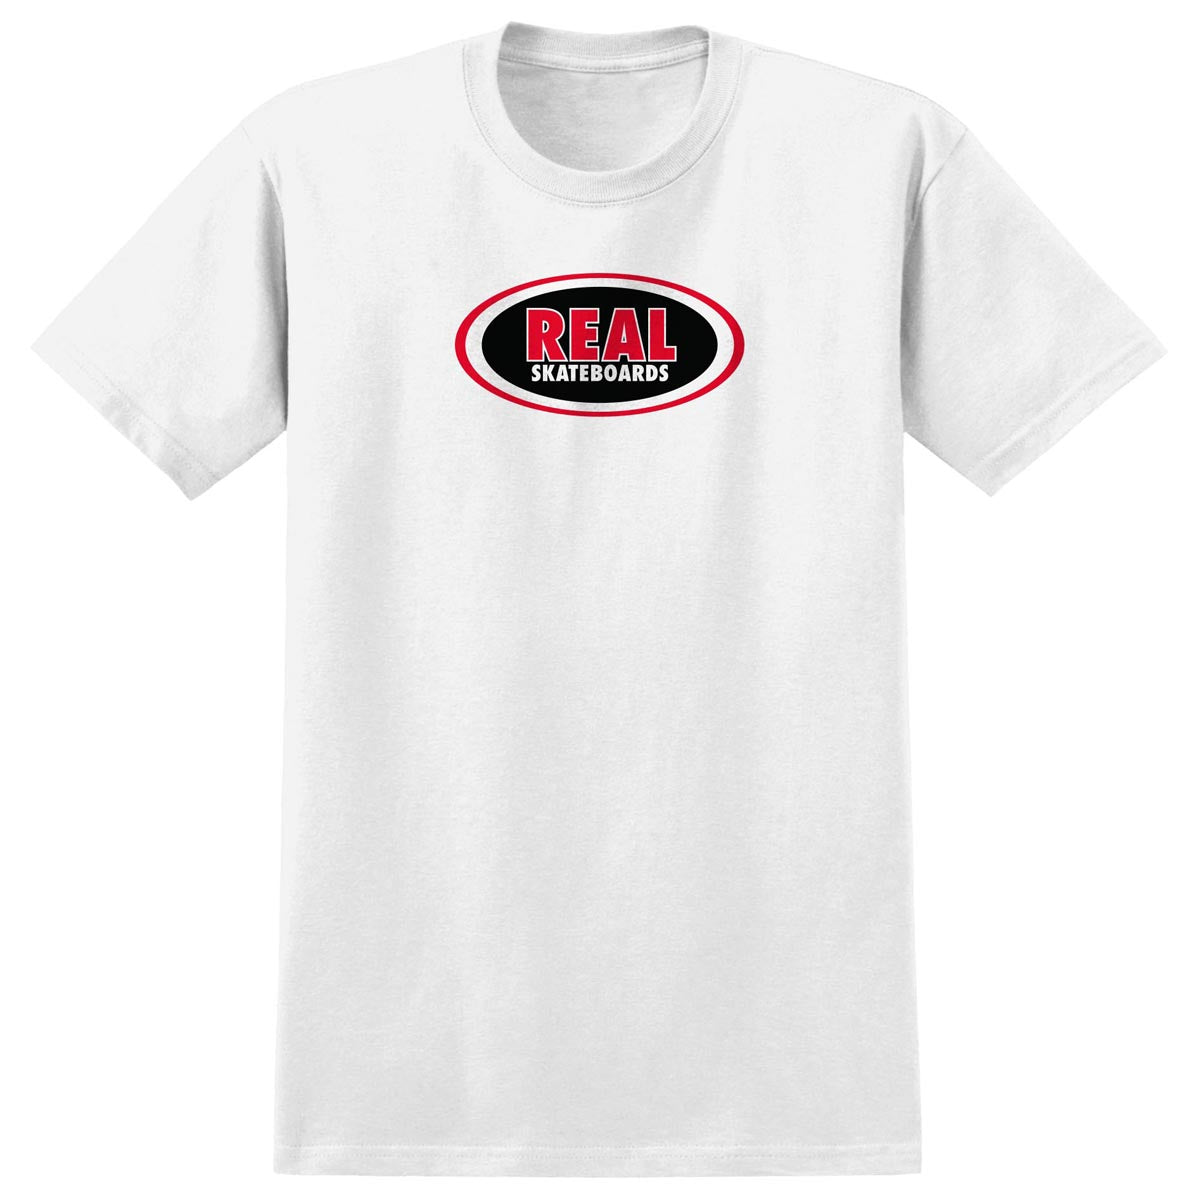 Real Oval T-Shirt - White/Red/Black/White image 1